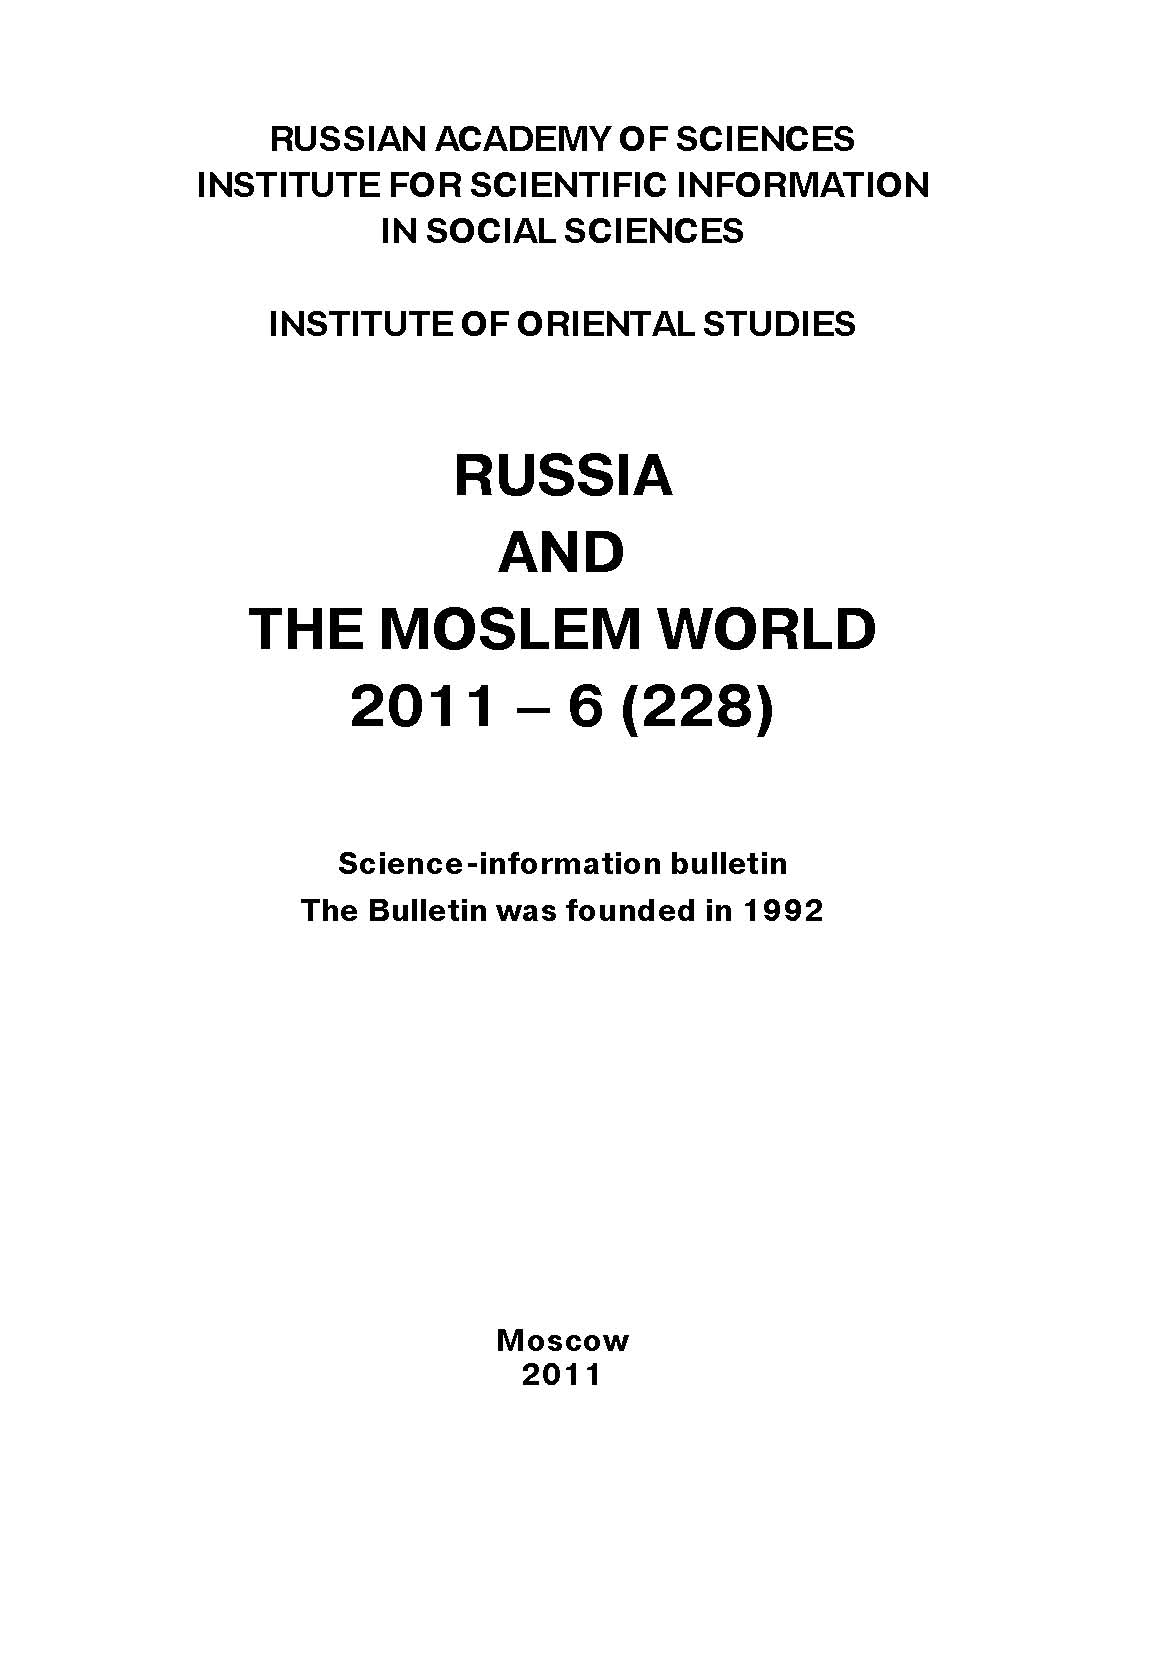 Russia and the Moslem World№ 06 / 2011